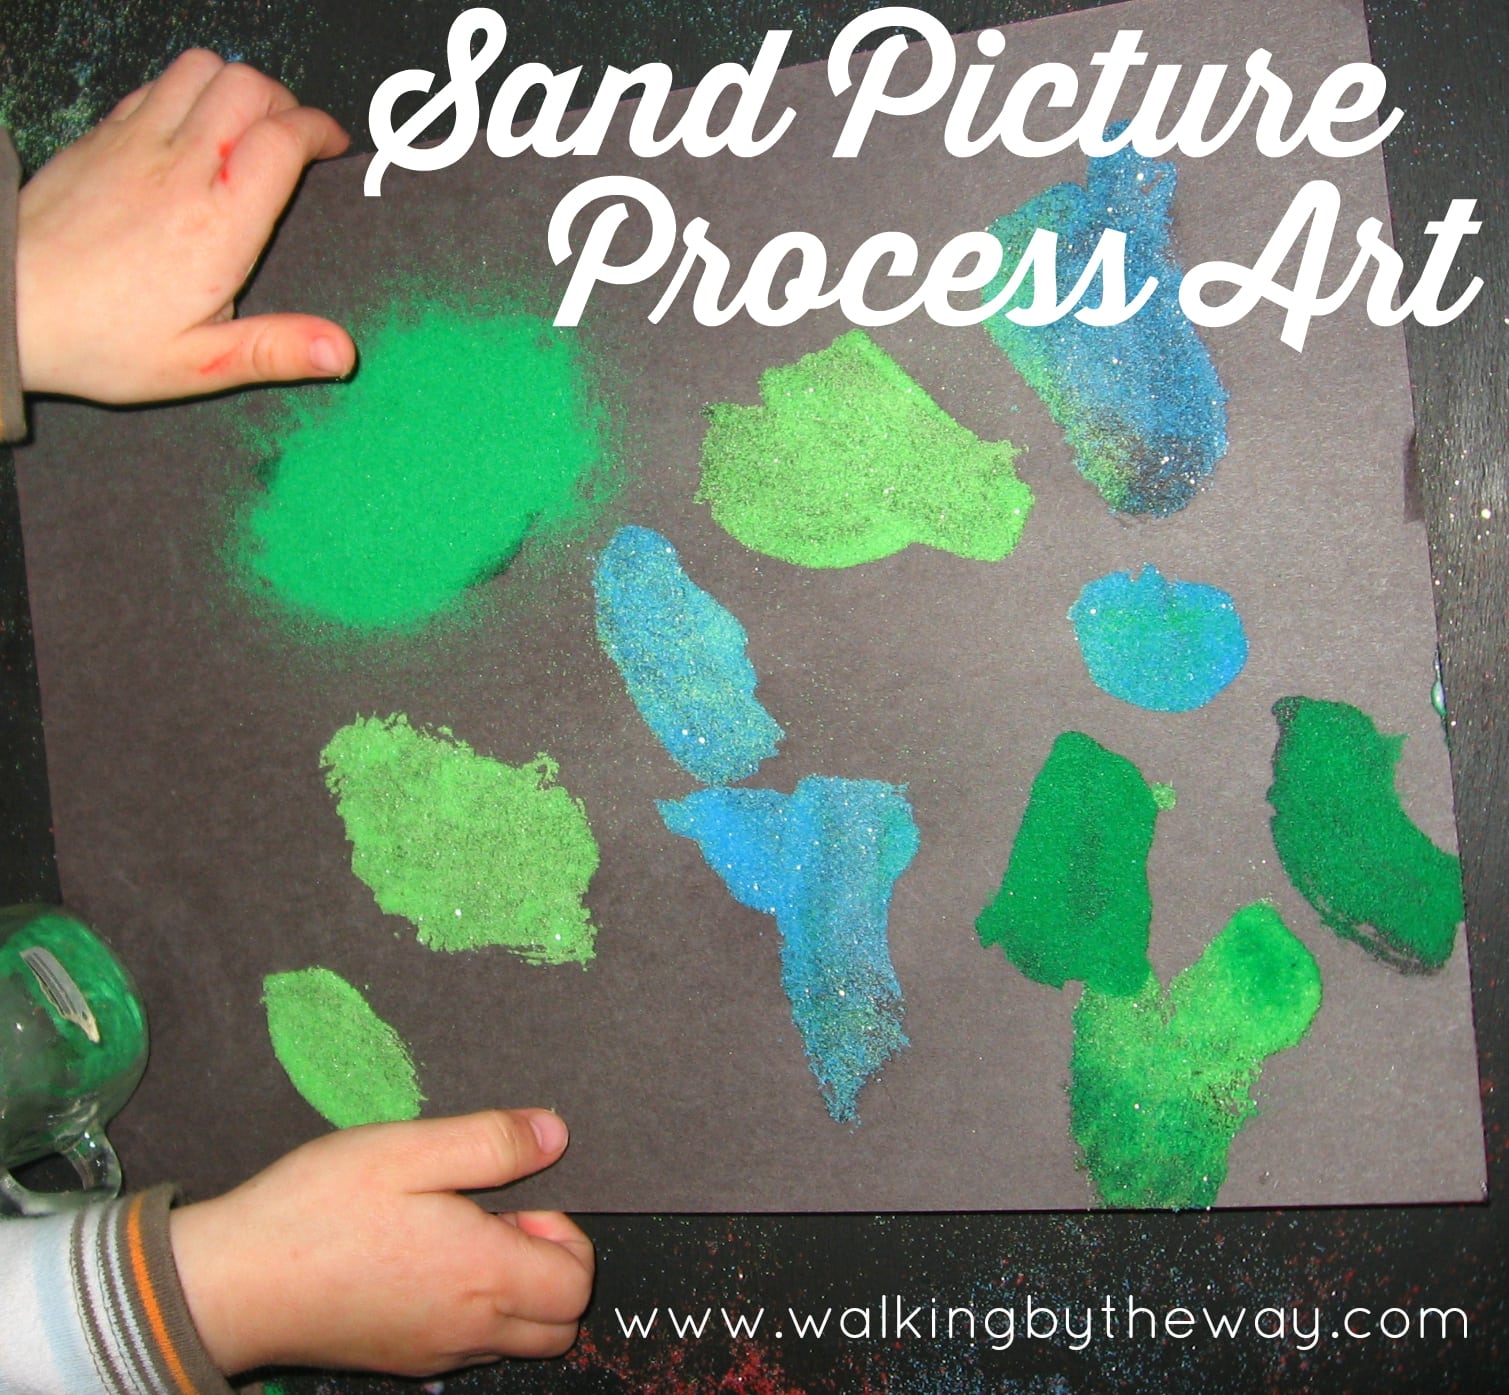 Sand Picture Process Art for toddlers and preschoolers from Walking by the Way